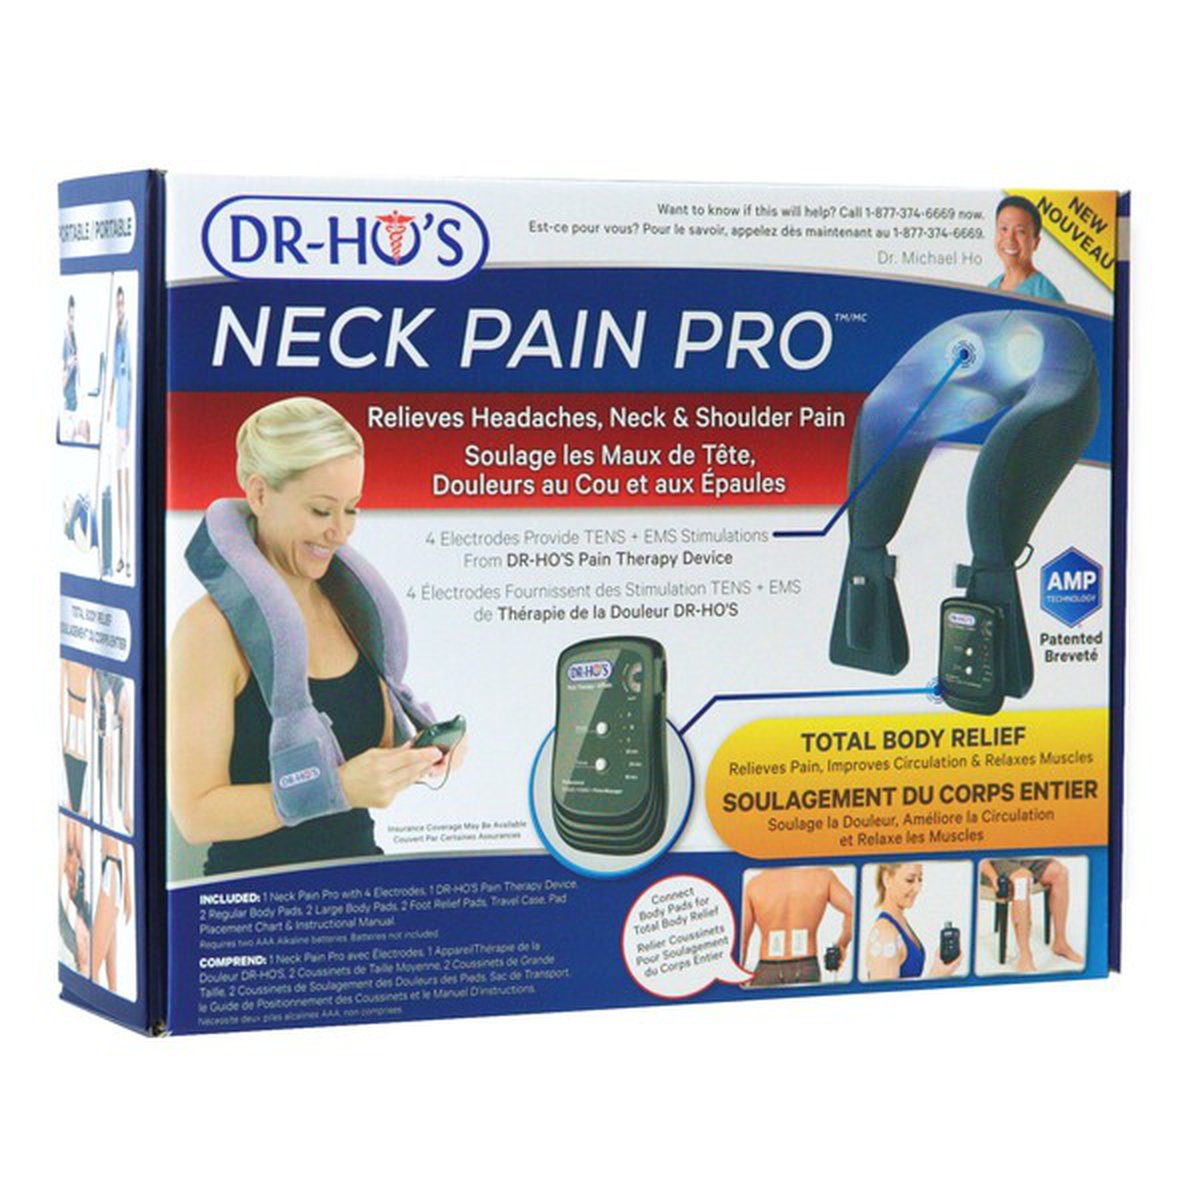 Dr-Ho's Back Pain Relief System TENS EMS | lupon.gov.ph